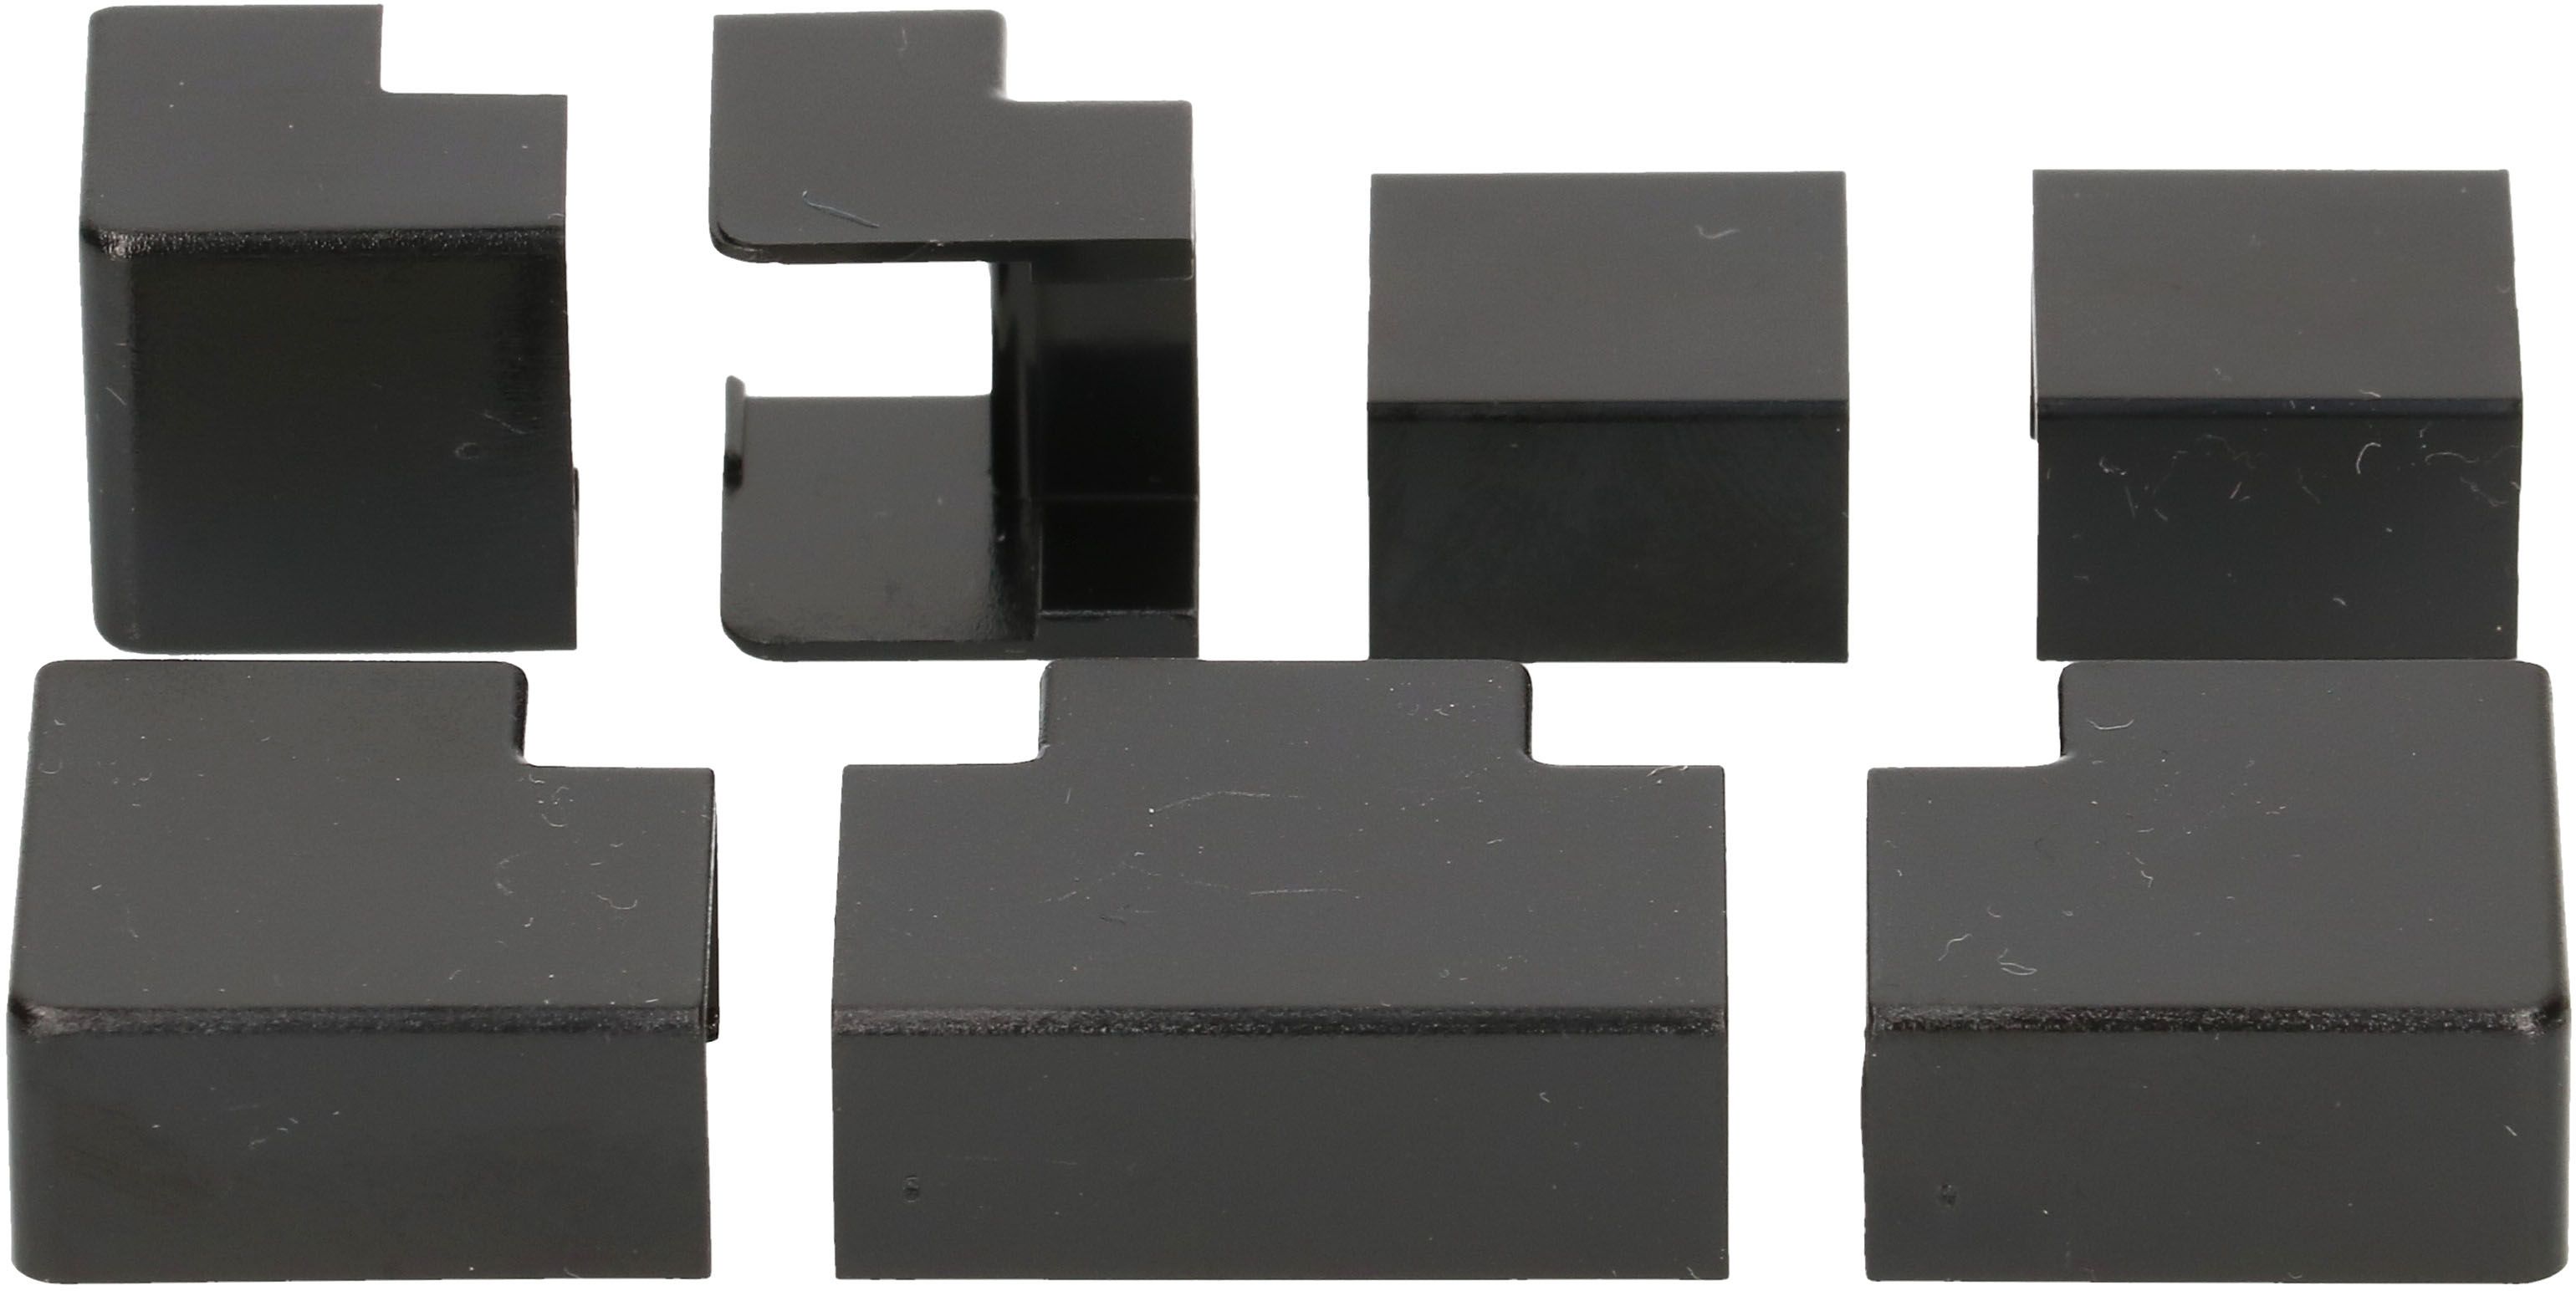 Assorted joints for cable duct 16x10mm black